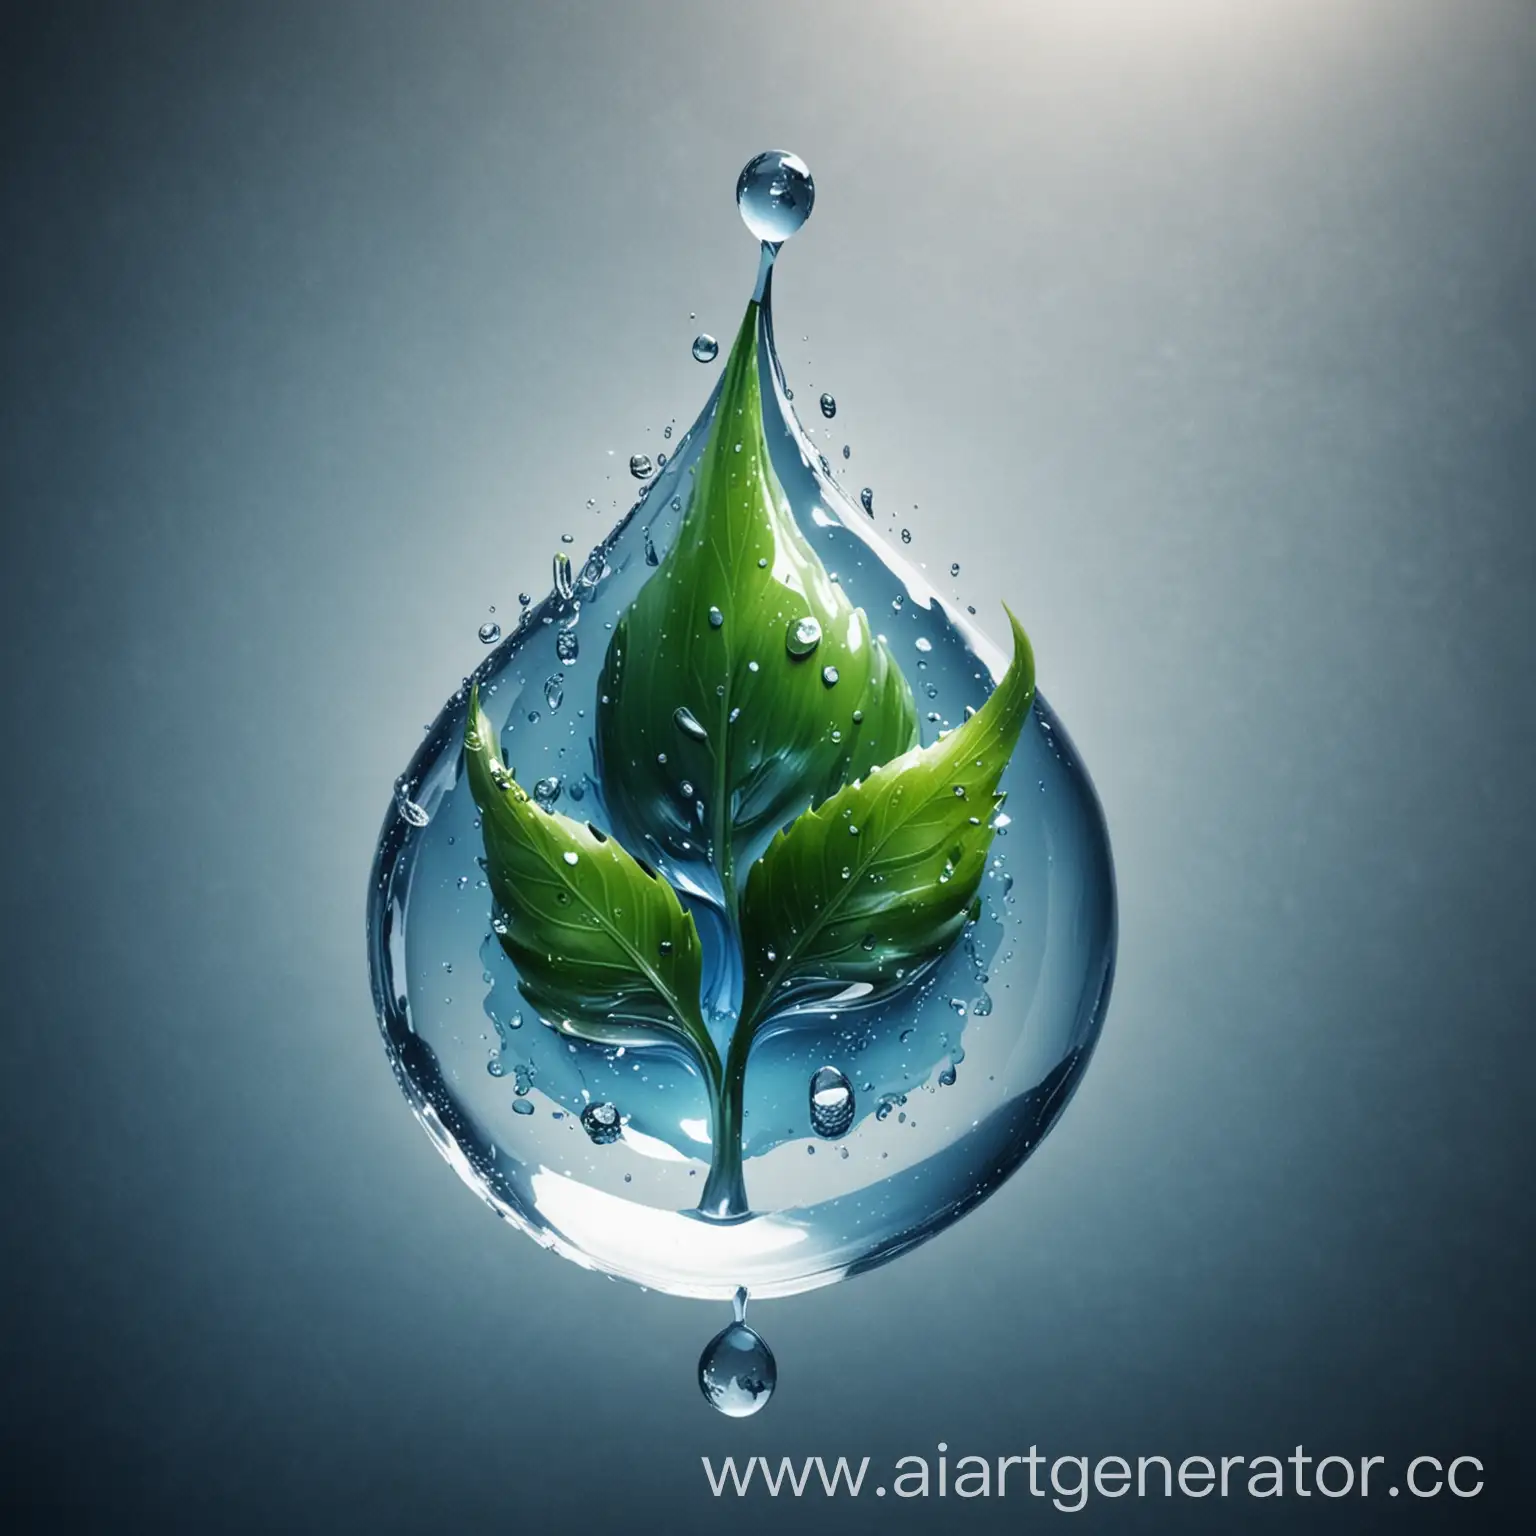 Water-Drop-Logo-with-Green-Leaves-Blue-Droplet-Encircled-by-Verdant-Foliage